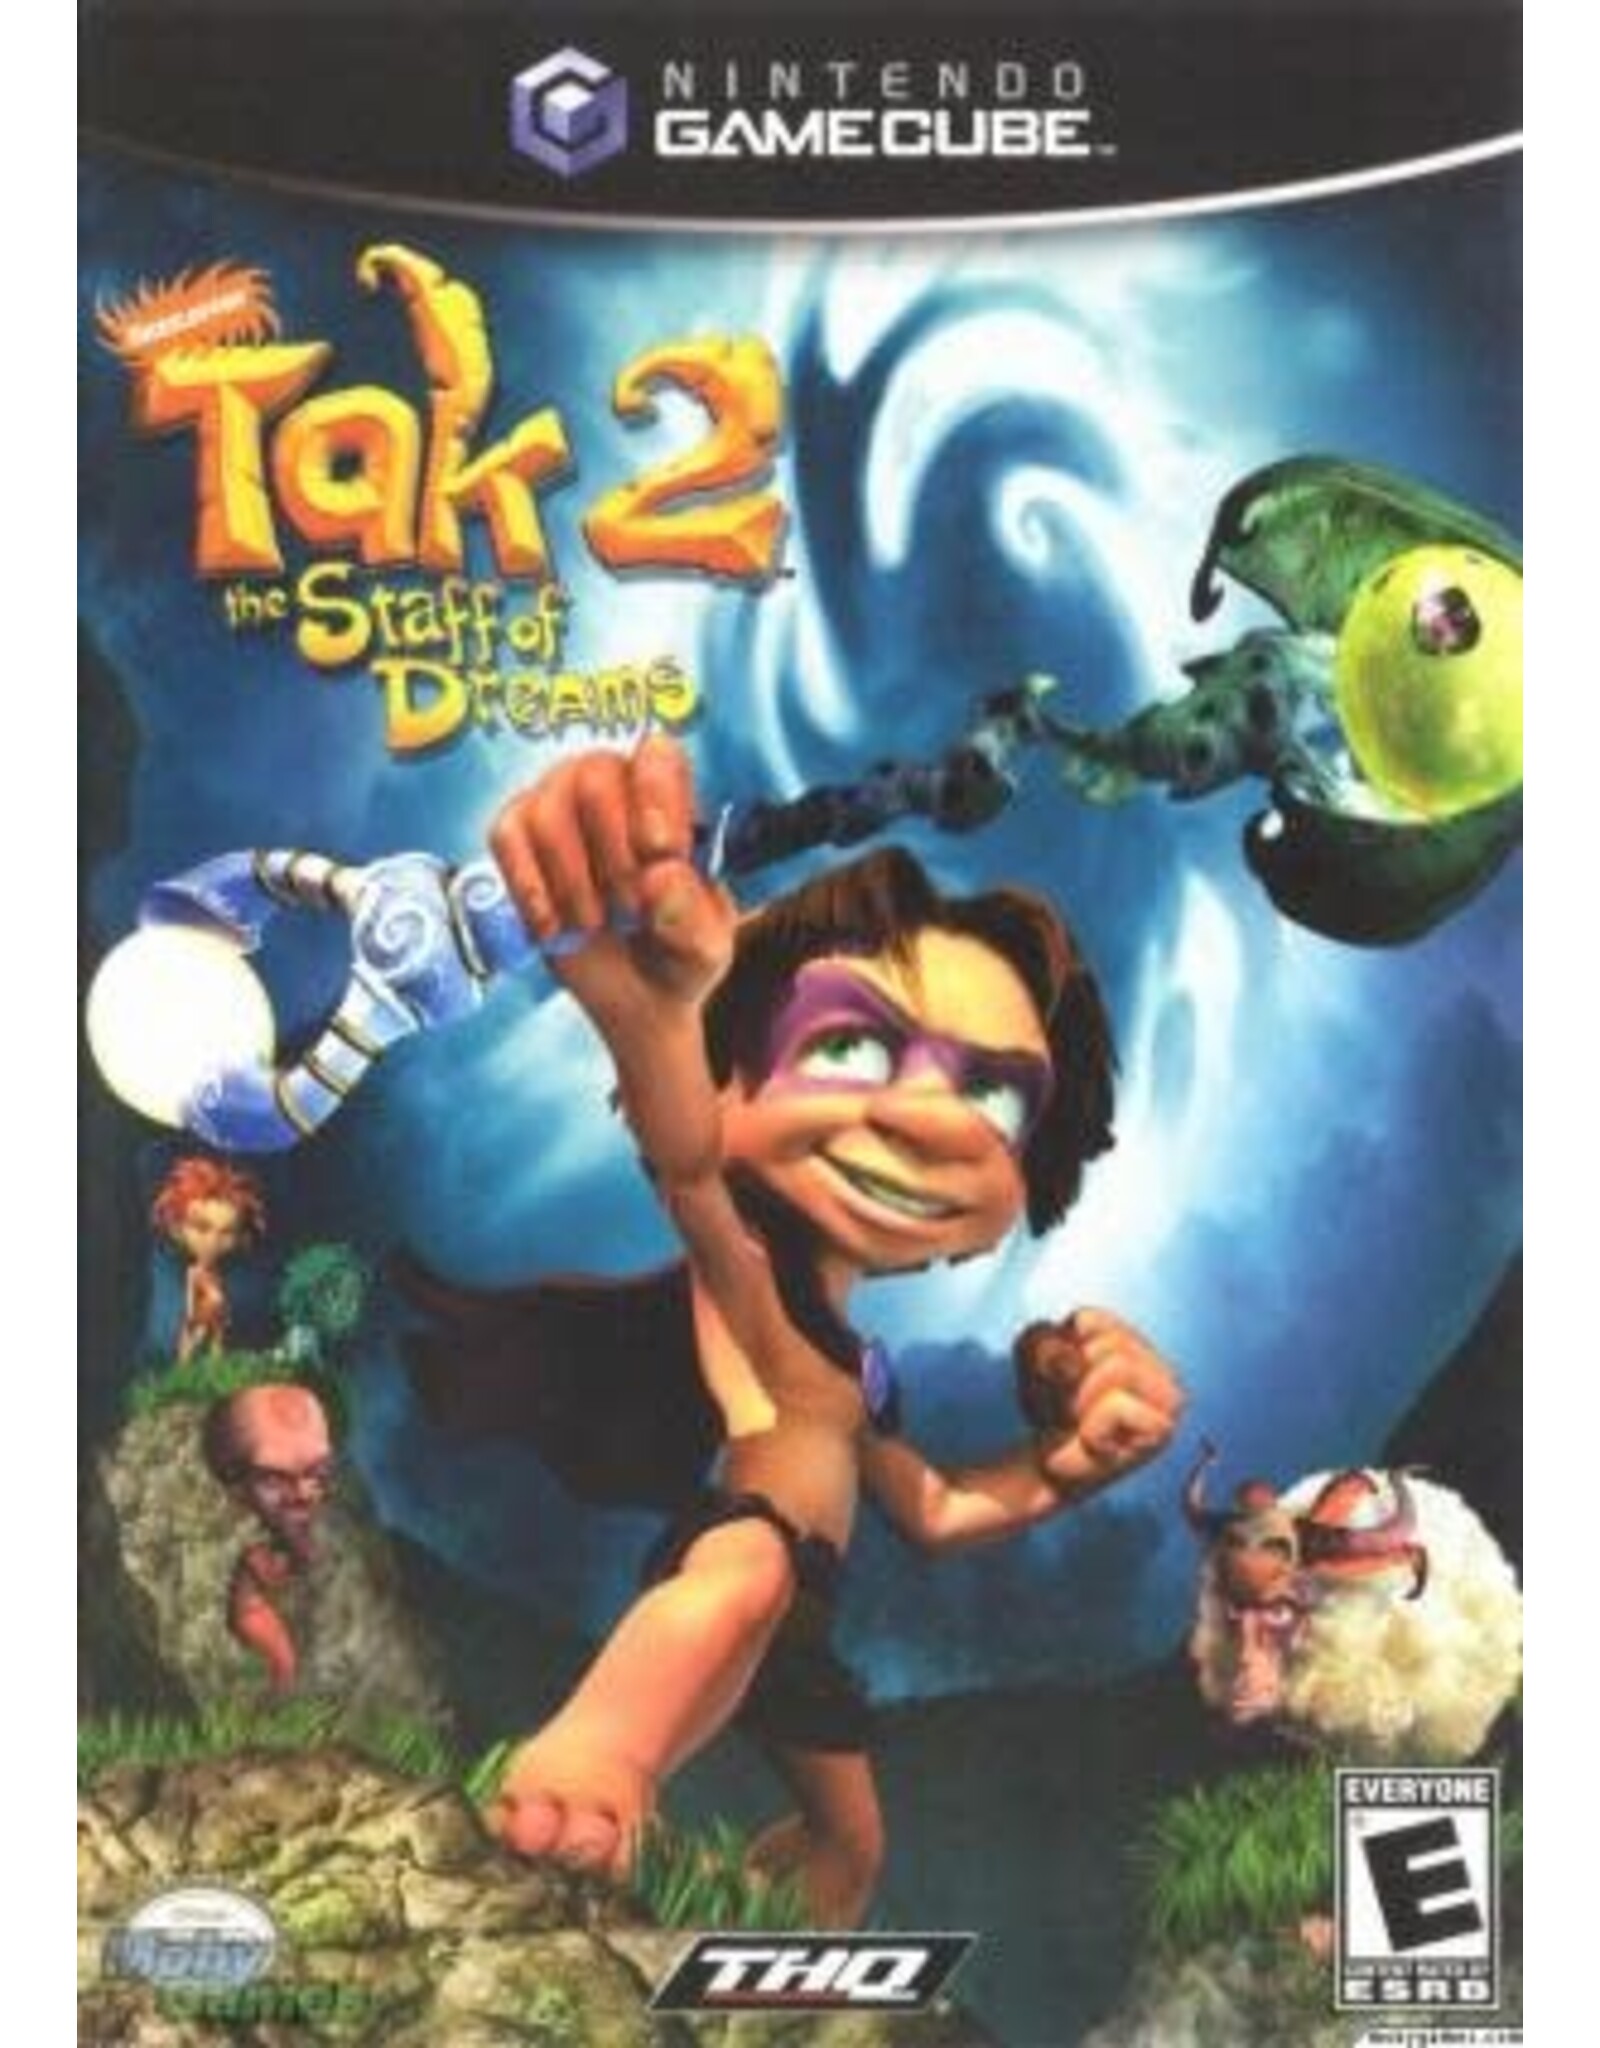 Gamecube Tak 2 The Staff of Dreams (Used)